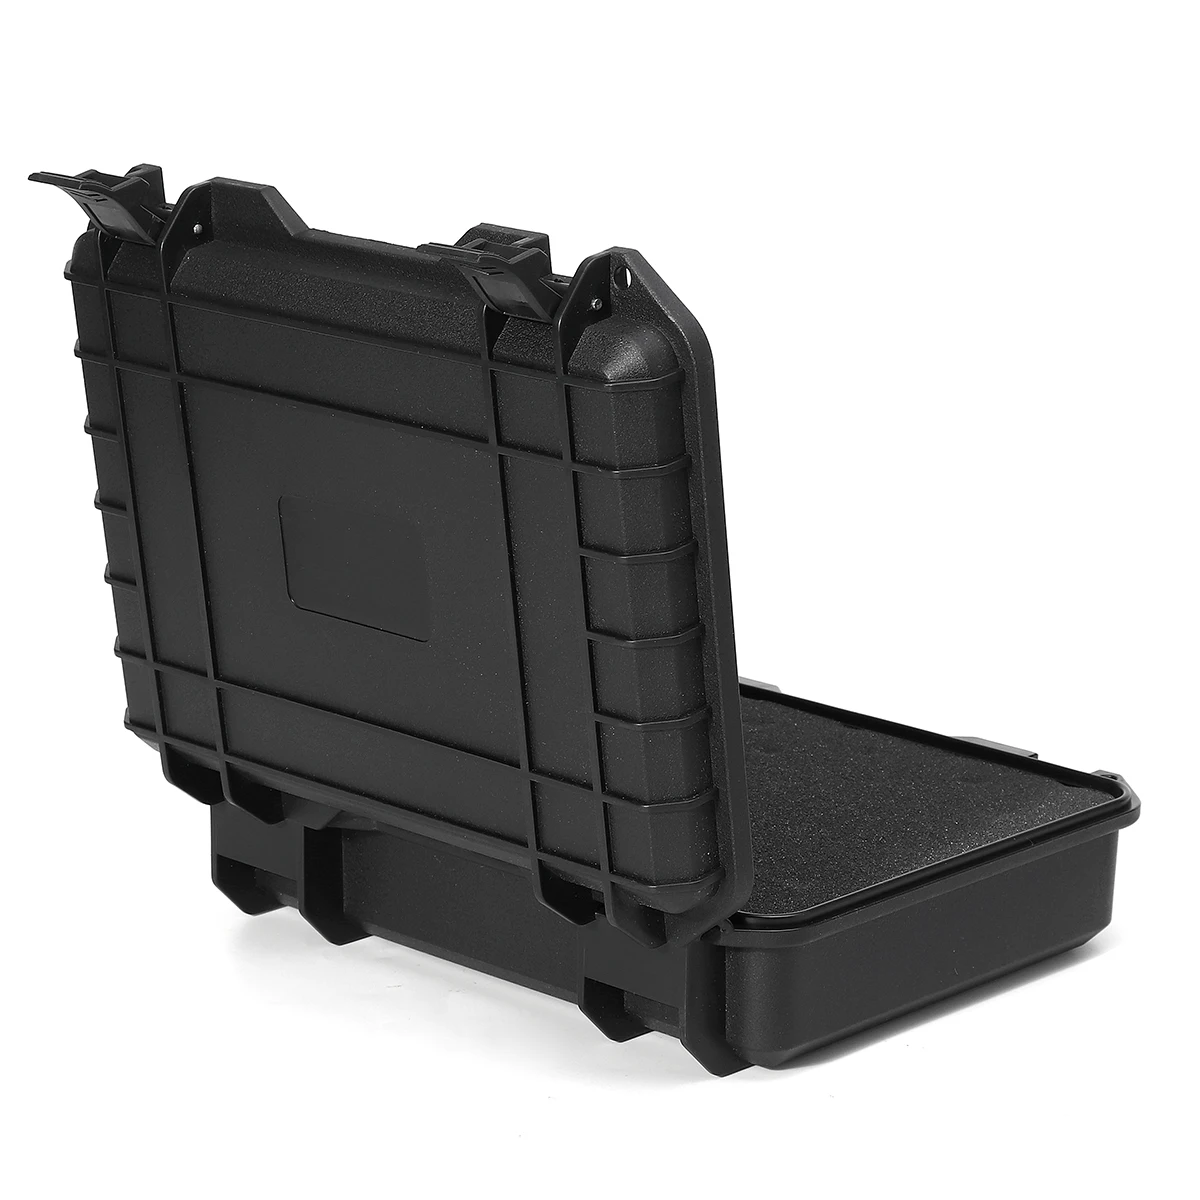 Plastic Safety Equipment Case Waterproof Hard Carry Tool Box Shockproof  Storage Box with Sponge for Tools Camera